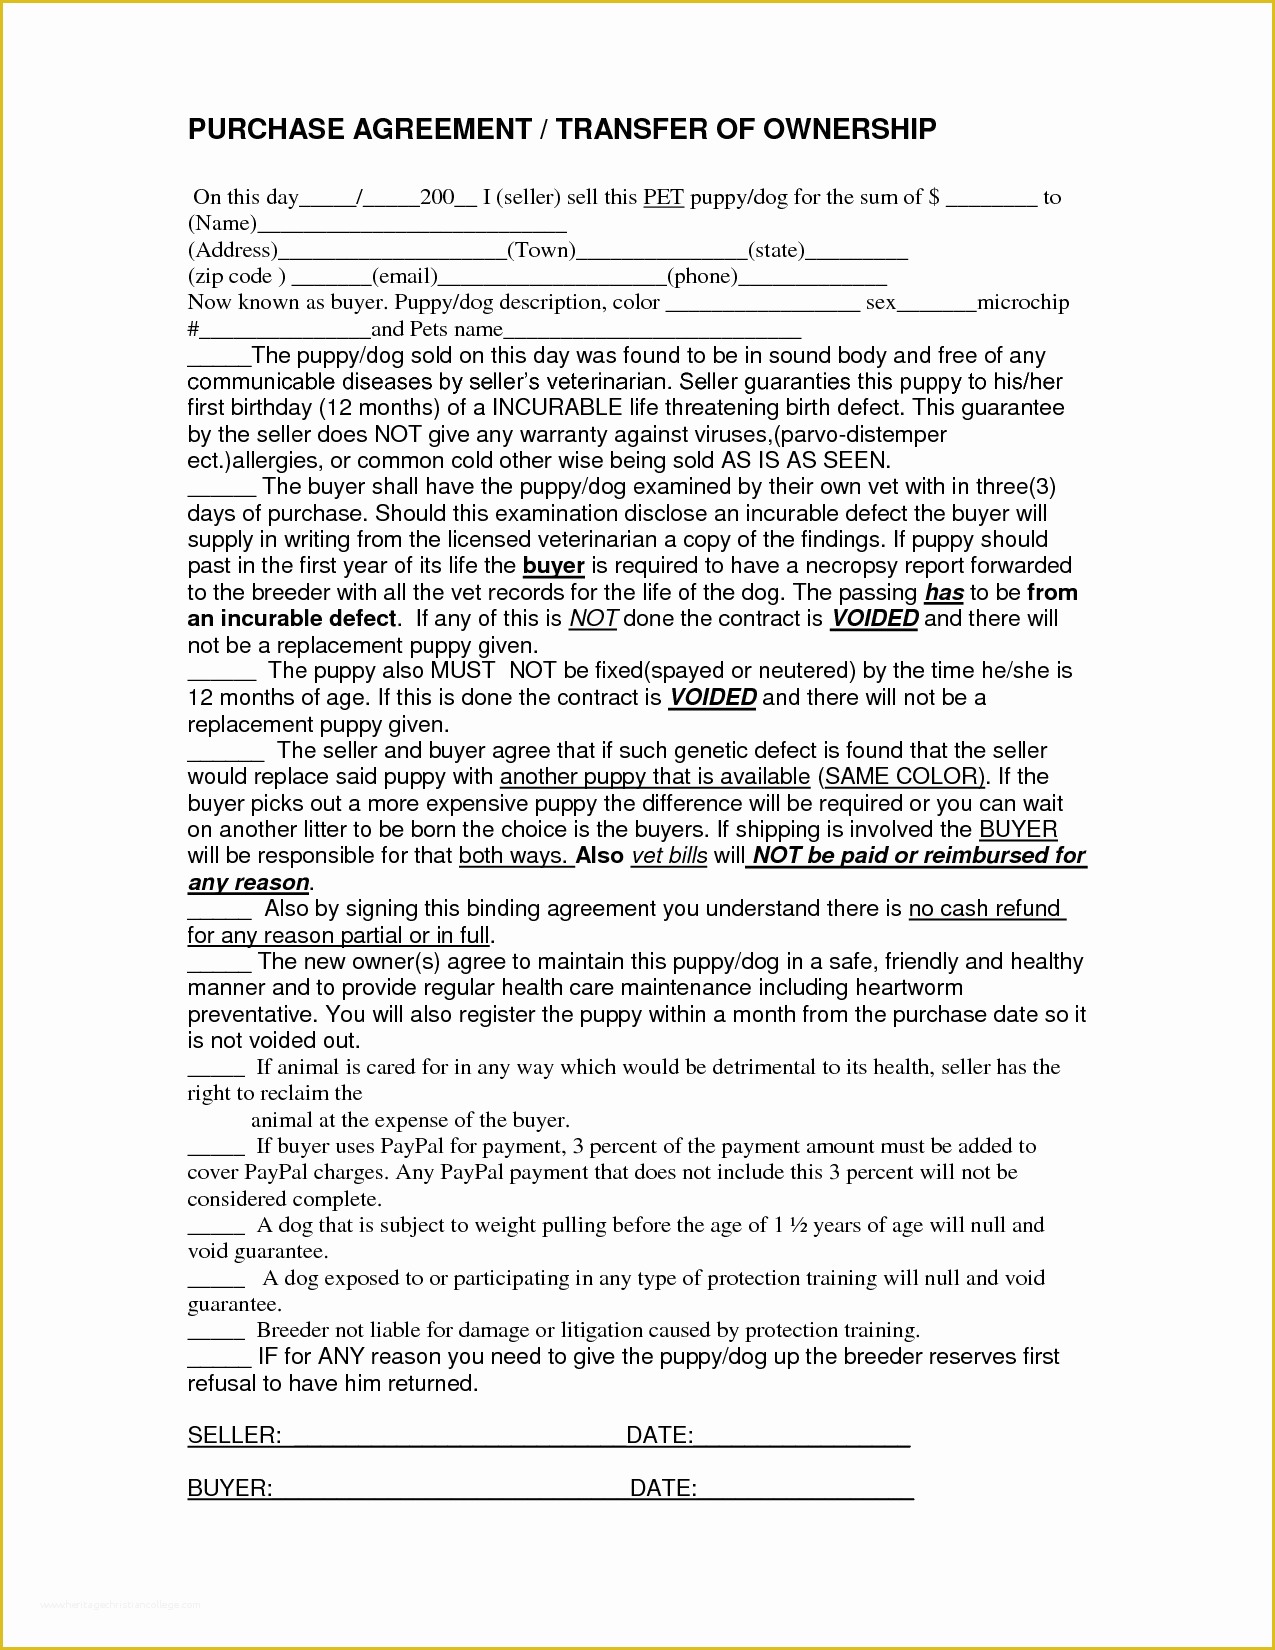 House for Sale by Owner Contract Template Free Of for Sale by Owner Purchase Agreement